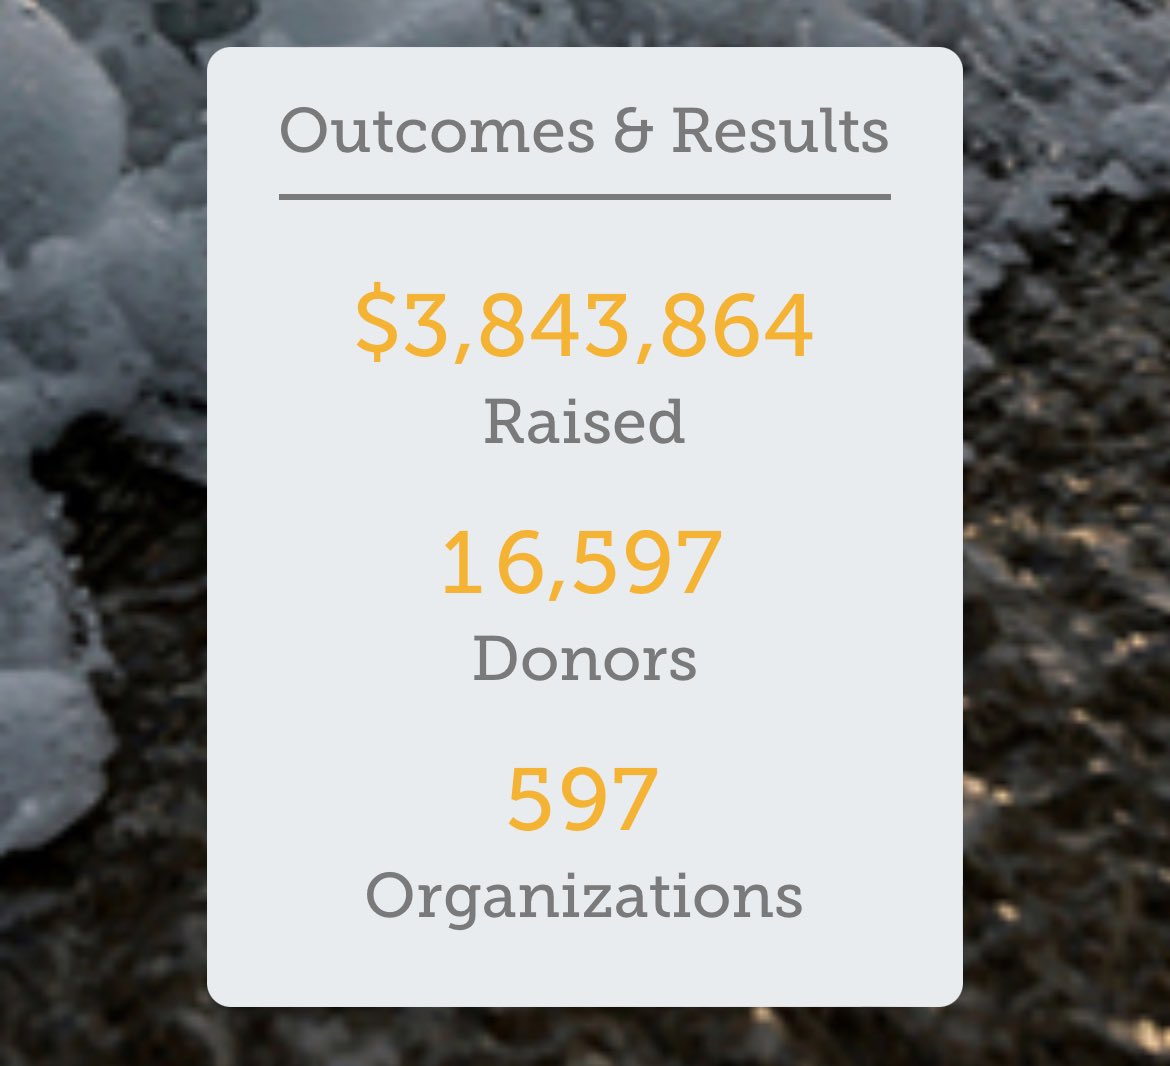 After all the offline donations and matches got processed - we landed at nearly $3.85 MILLION - Wowsa!! I beam with gratitude over the abundant generosity of our beloved state. 

Thank you, RI, for being the community I know and adore! #401Gives #LiveUnitedRI